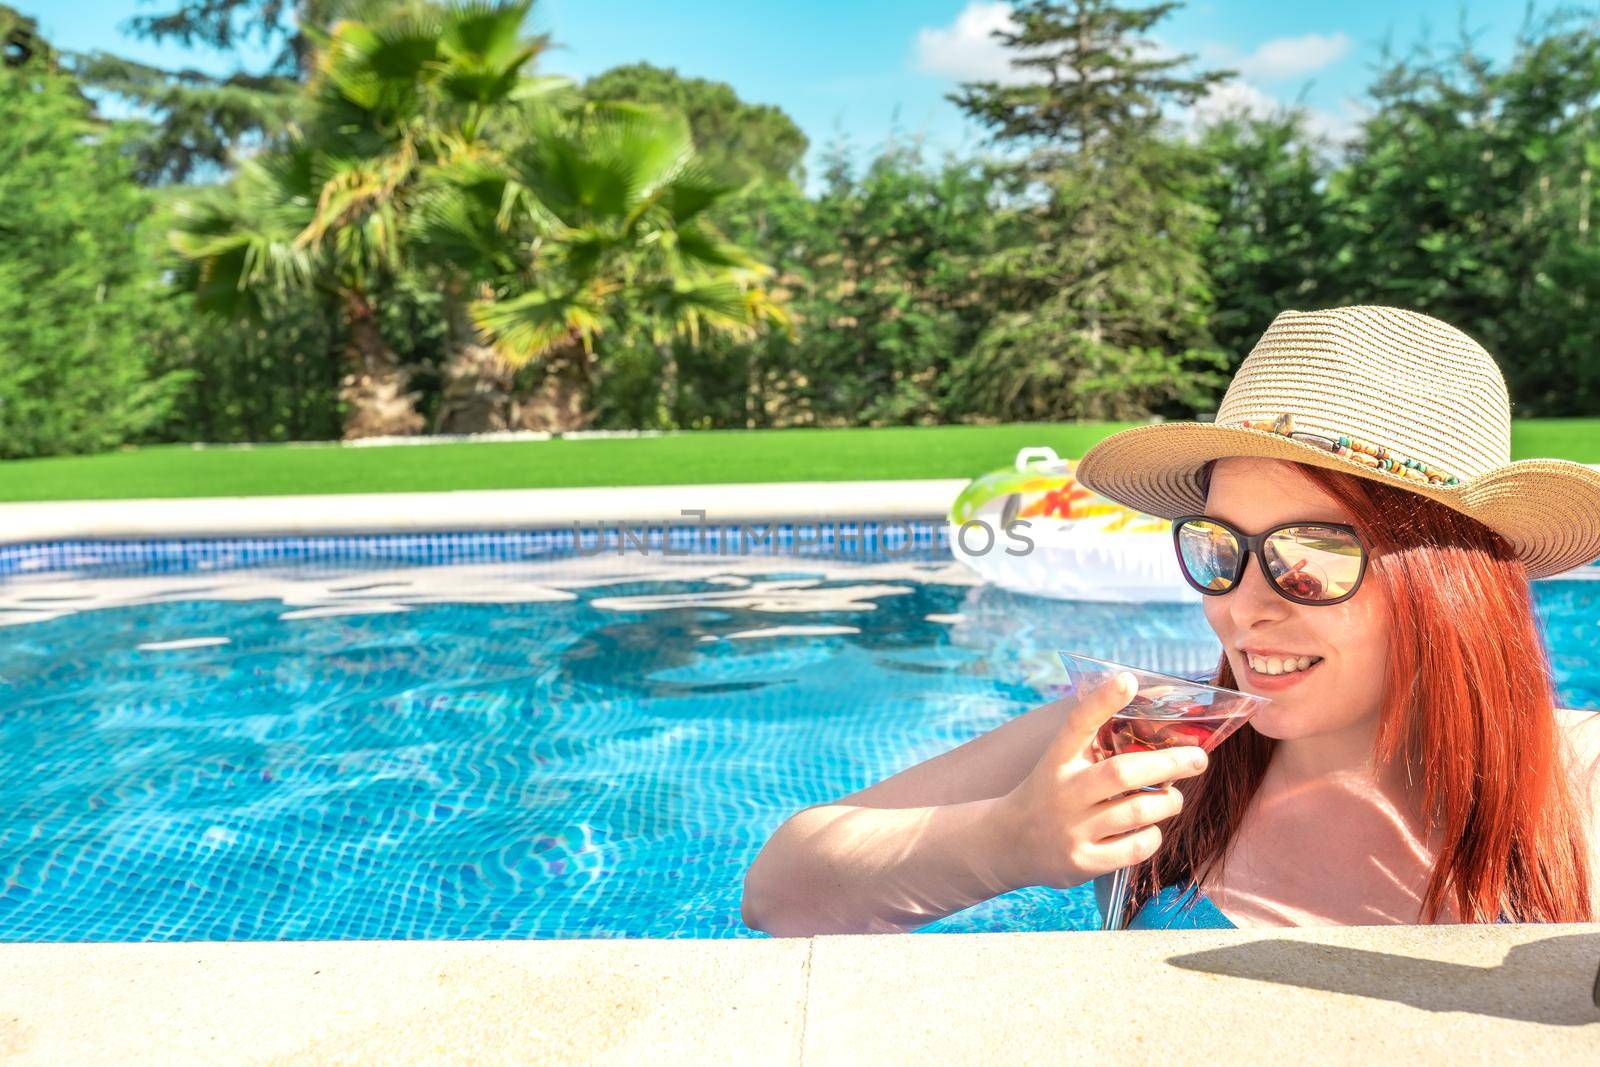 young woman with hat and sunglasses, having a refreshing drink inside the swimming pool. young girl on summer holiday sunbathing by the pool. concept of summer and free time. by CatPhotography